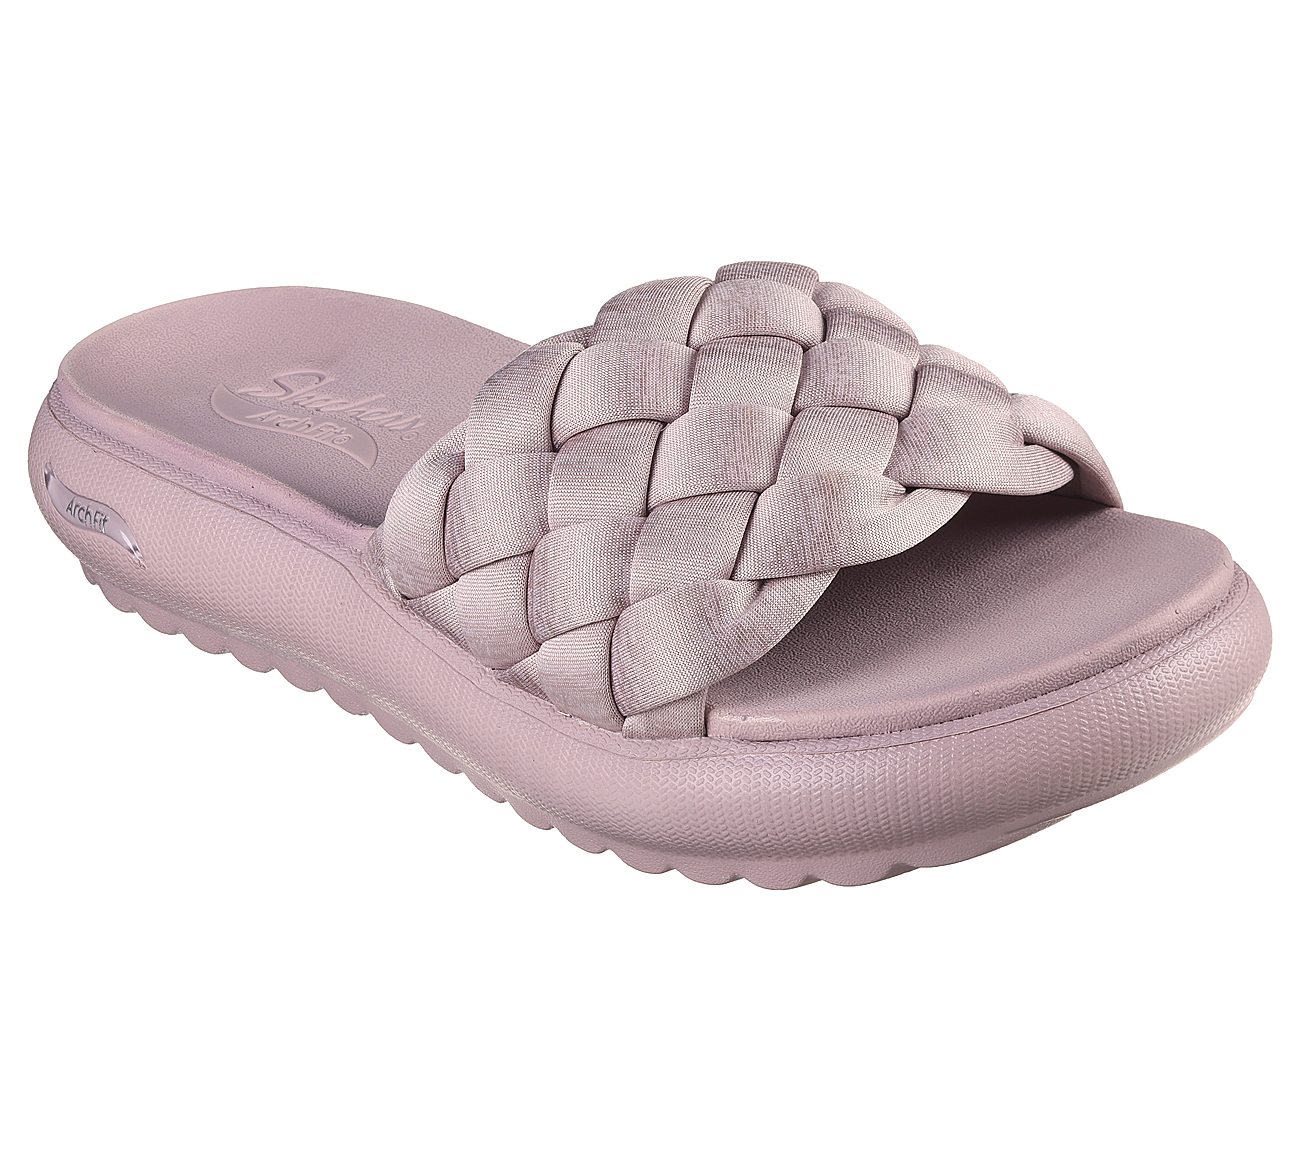 ARCH FIT CLOUD - BEST OF ME, PURPLE Footwear Right View